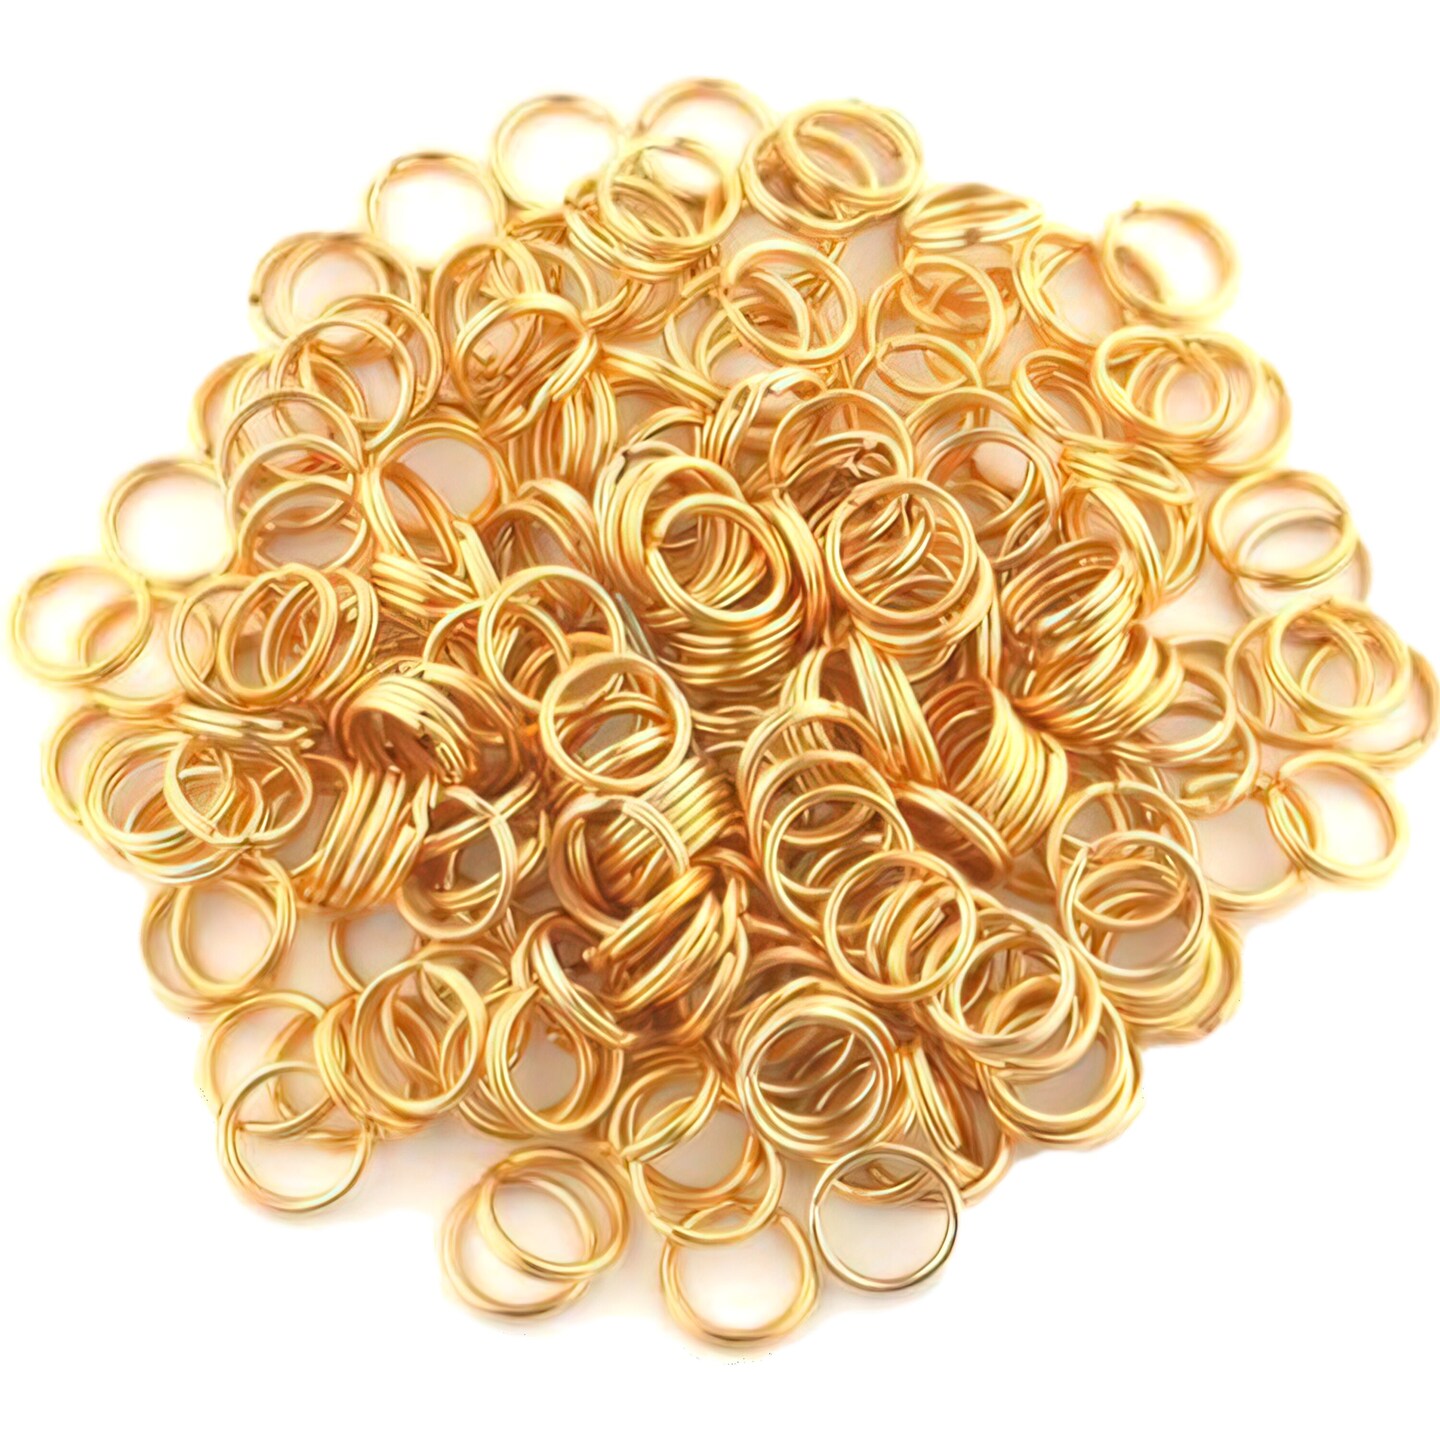 250 Gold Plated Split Ring Jewelry Chain Parts 9mm